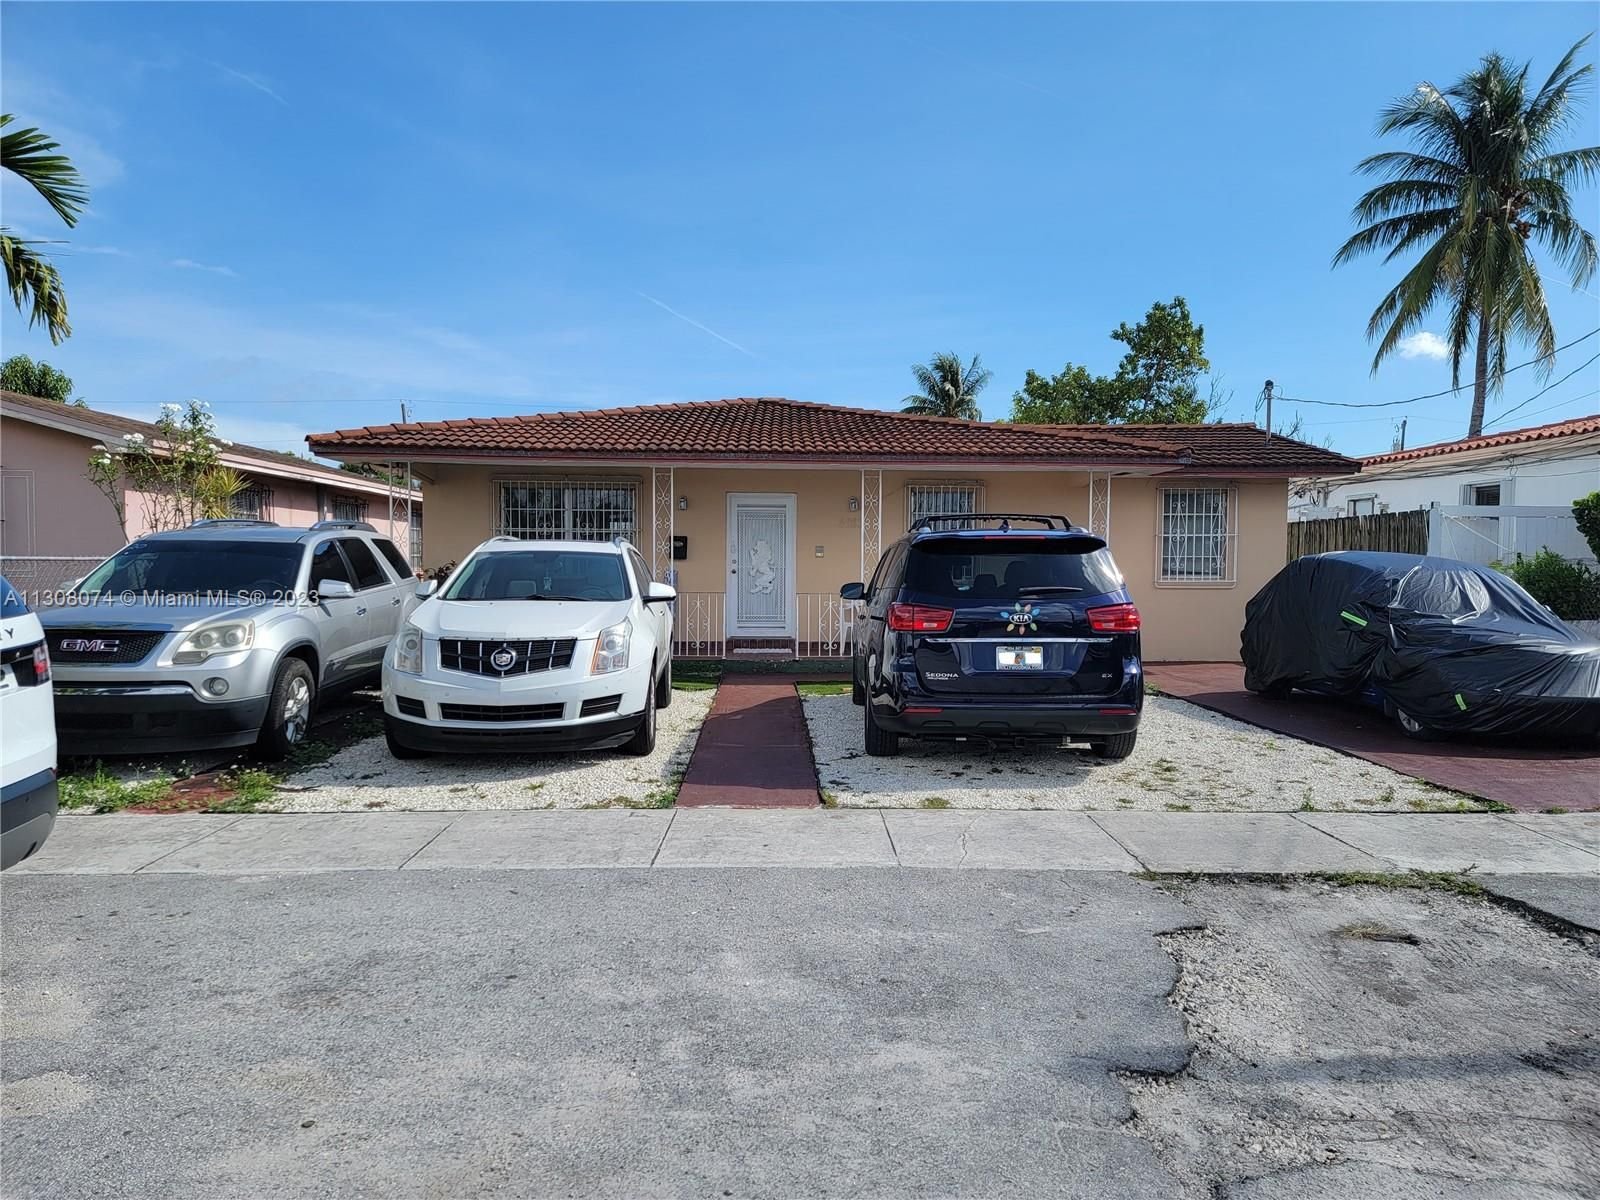 Real estate property located at 4183 8th Ct, Miami-Dade County, Hialeah, FL